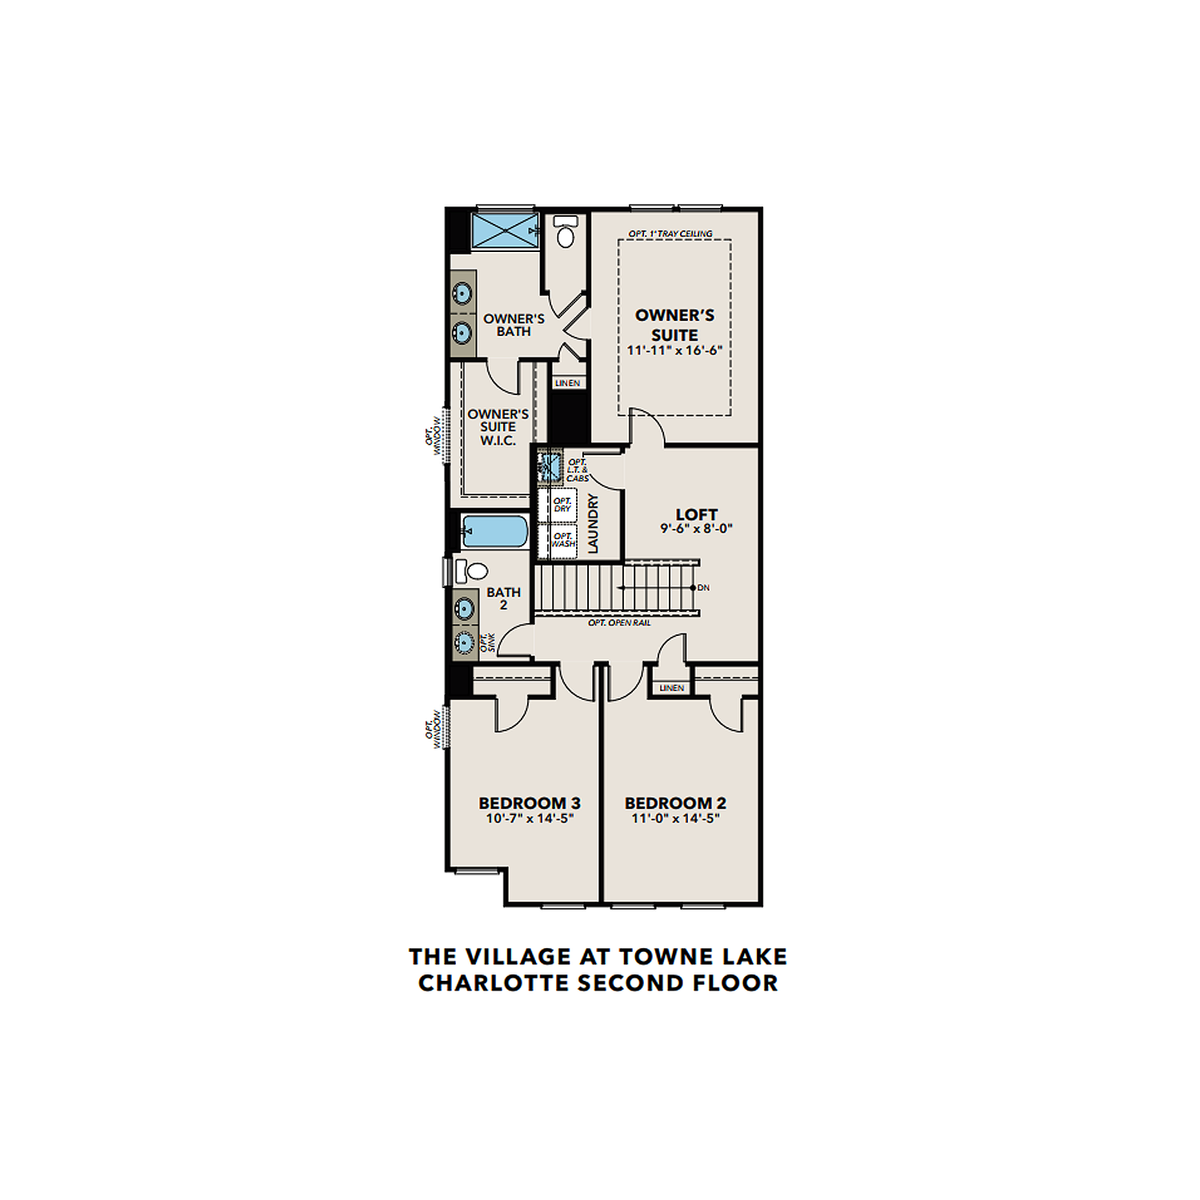 2 - The Charlotte D floor plan layout for 719 Stickley Oak Way in Davidson Homes' The Village at Towne Lake community.